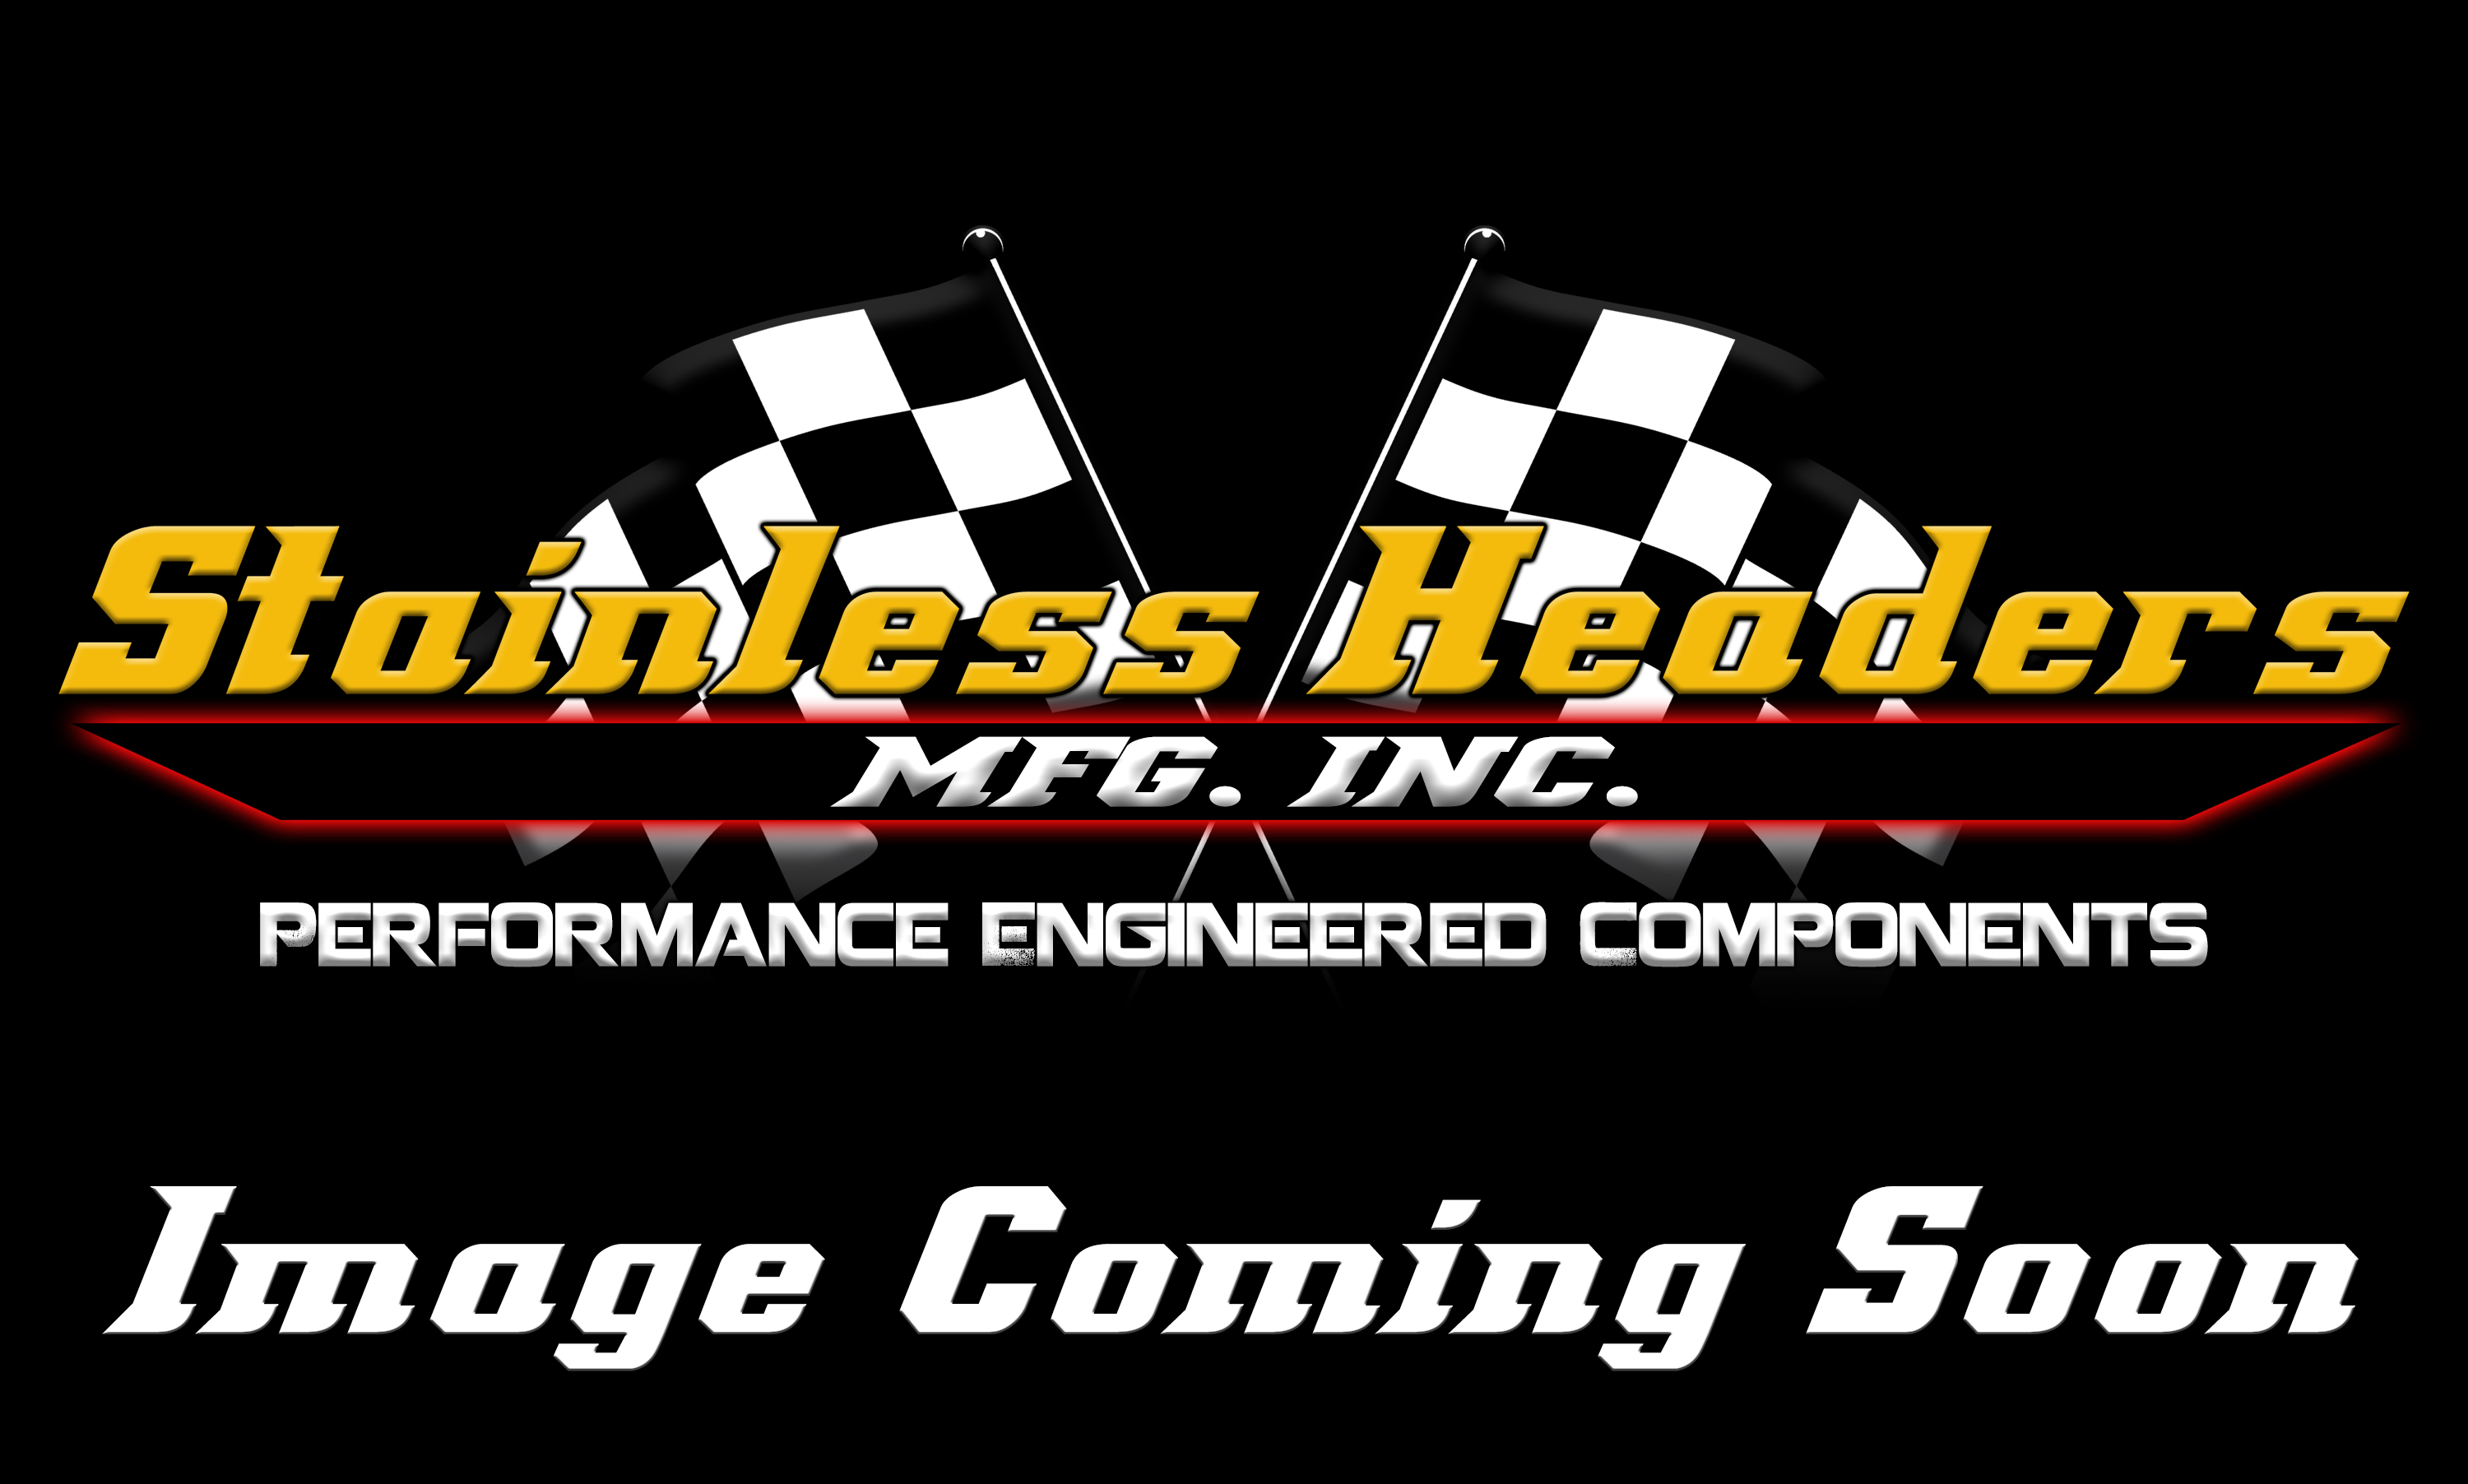 CompTurbo Technologies - CTR4202R-7485 Mid Frame Oil-Less 3.0 Turbocharger (1300 HP)